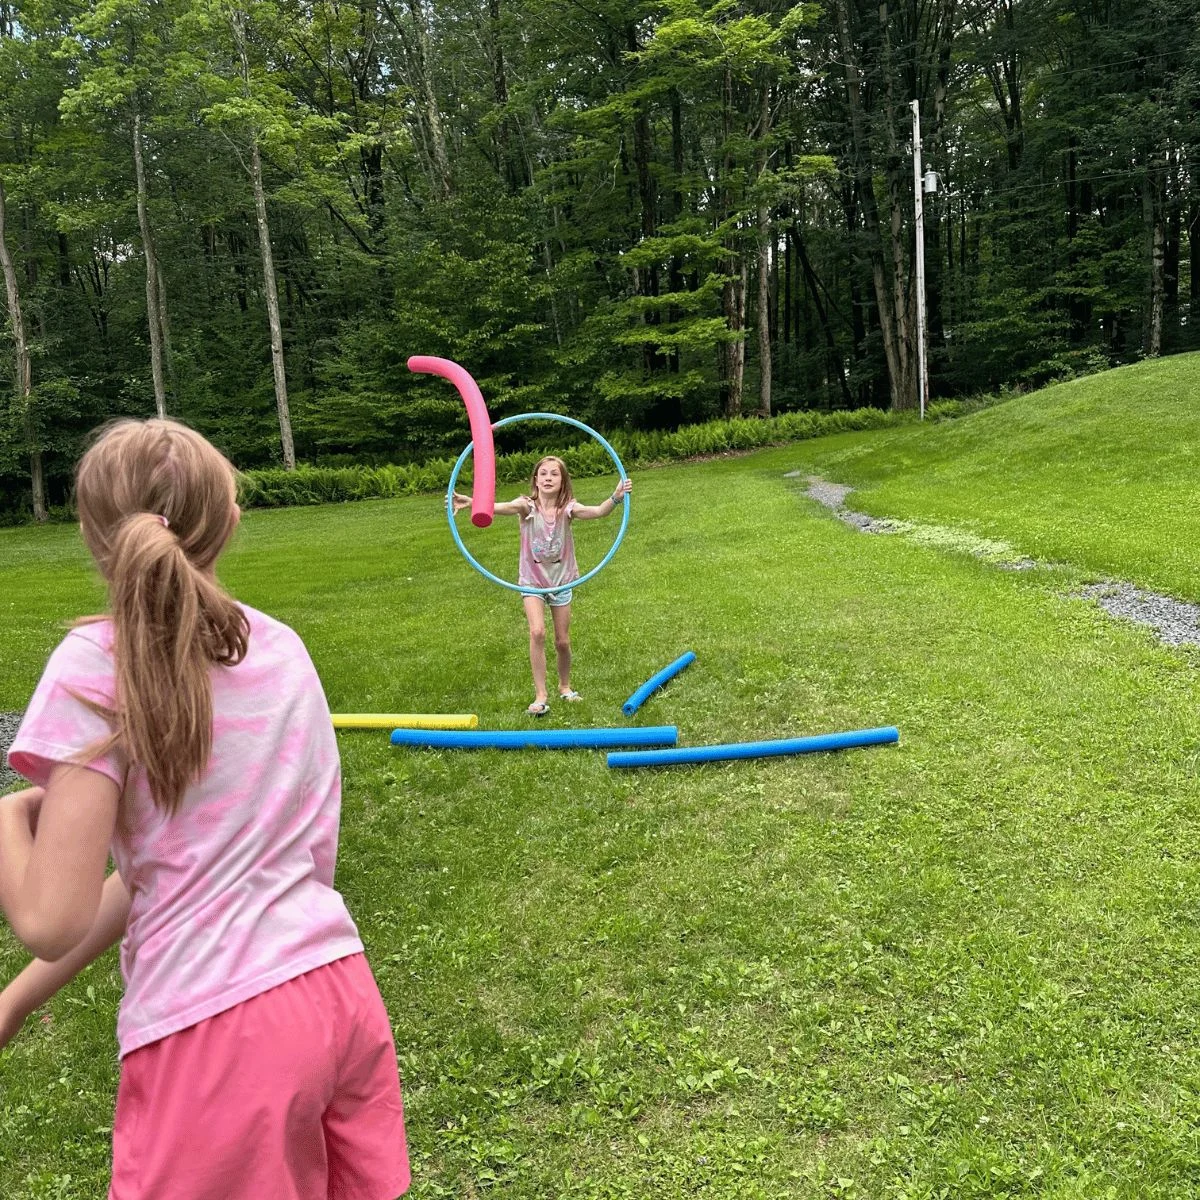 child trying to throw pool noodle through the hula hoop that her sister is holding